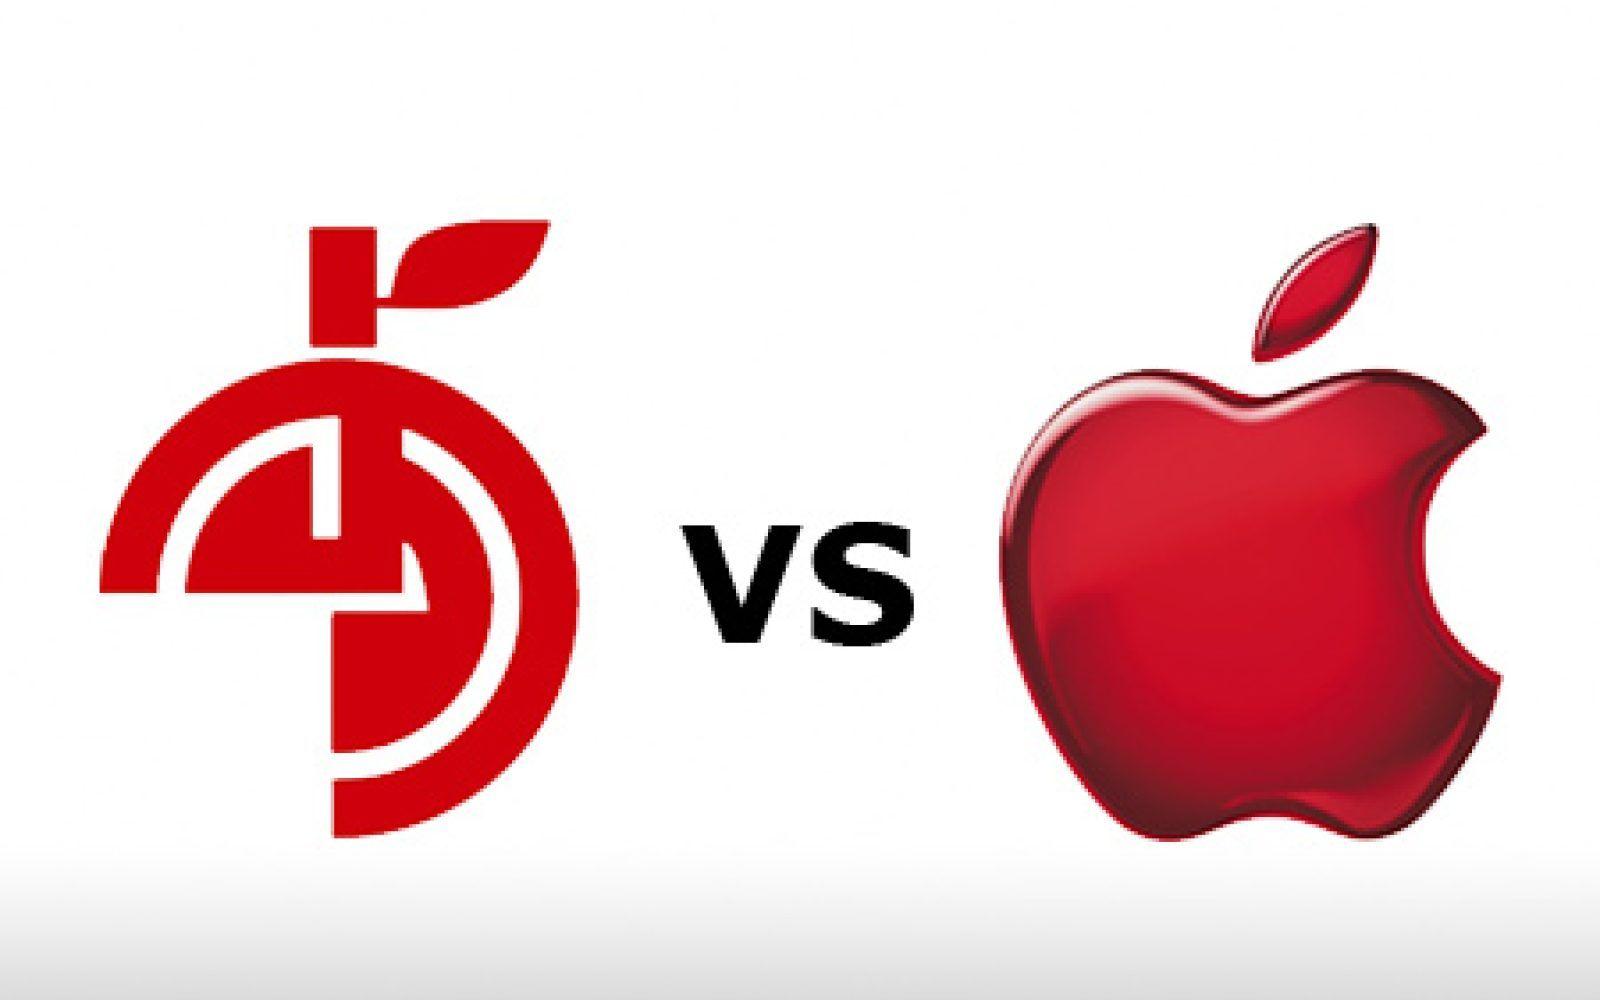 Chinese Phone Company Logo - Apple accuses Chinese food company of copying logo - 9to5Mac